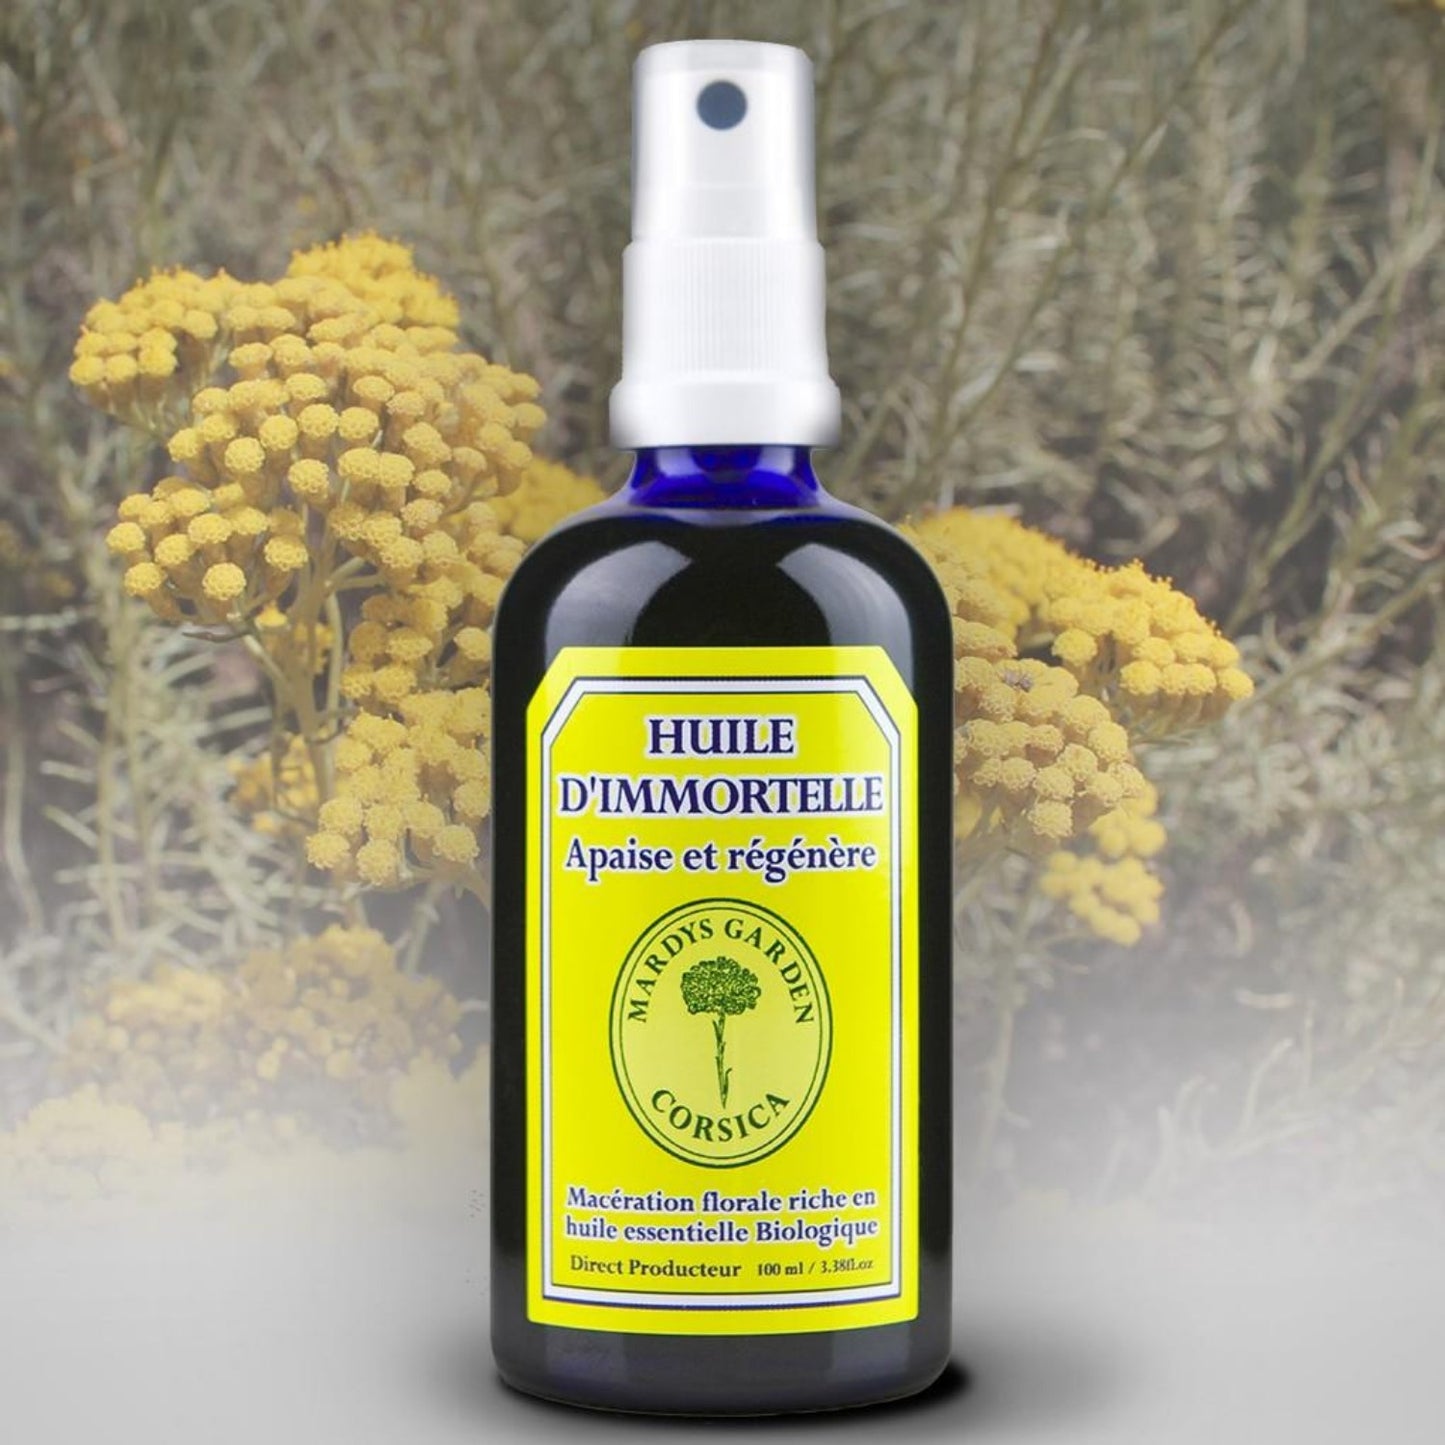 Immortelle Oil 100ml. Made in Corsica. Macerated Oil from Helichysum Italicum flowers. Enriched in Organic Essential Oil. Soothes and Revives